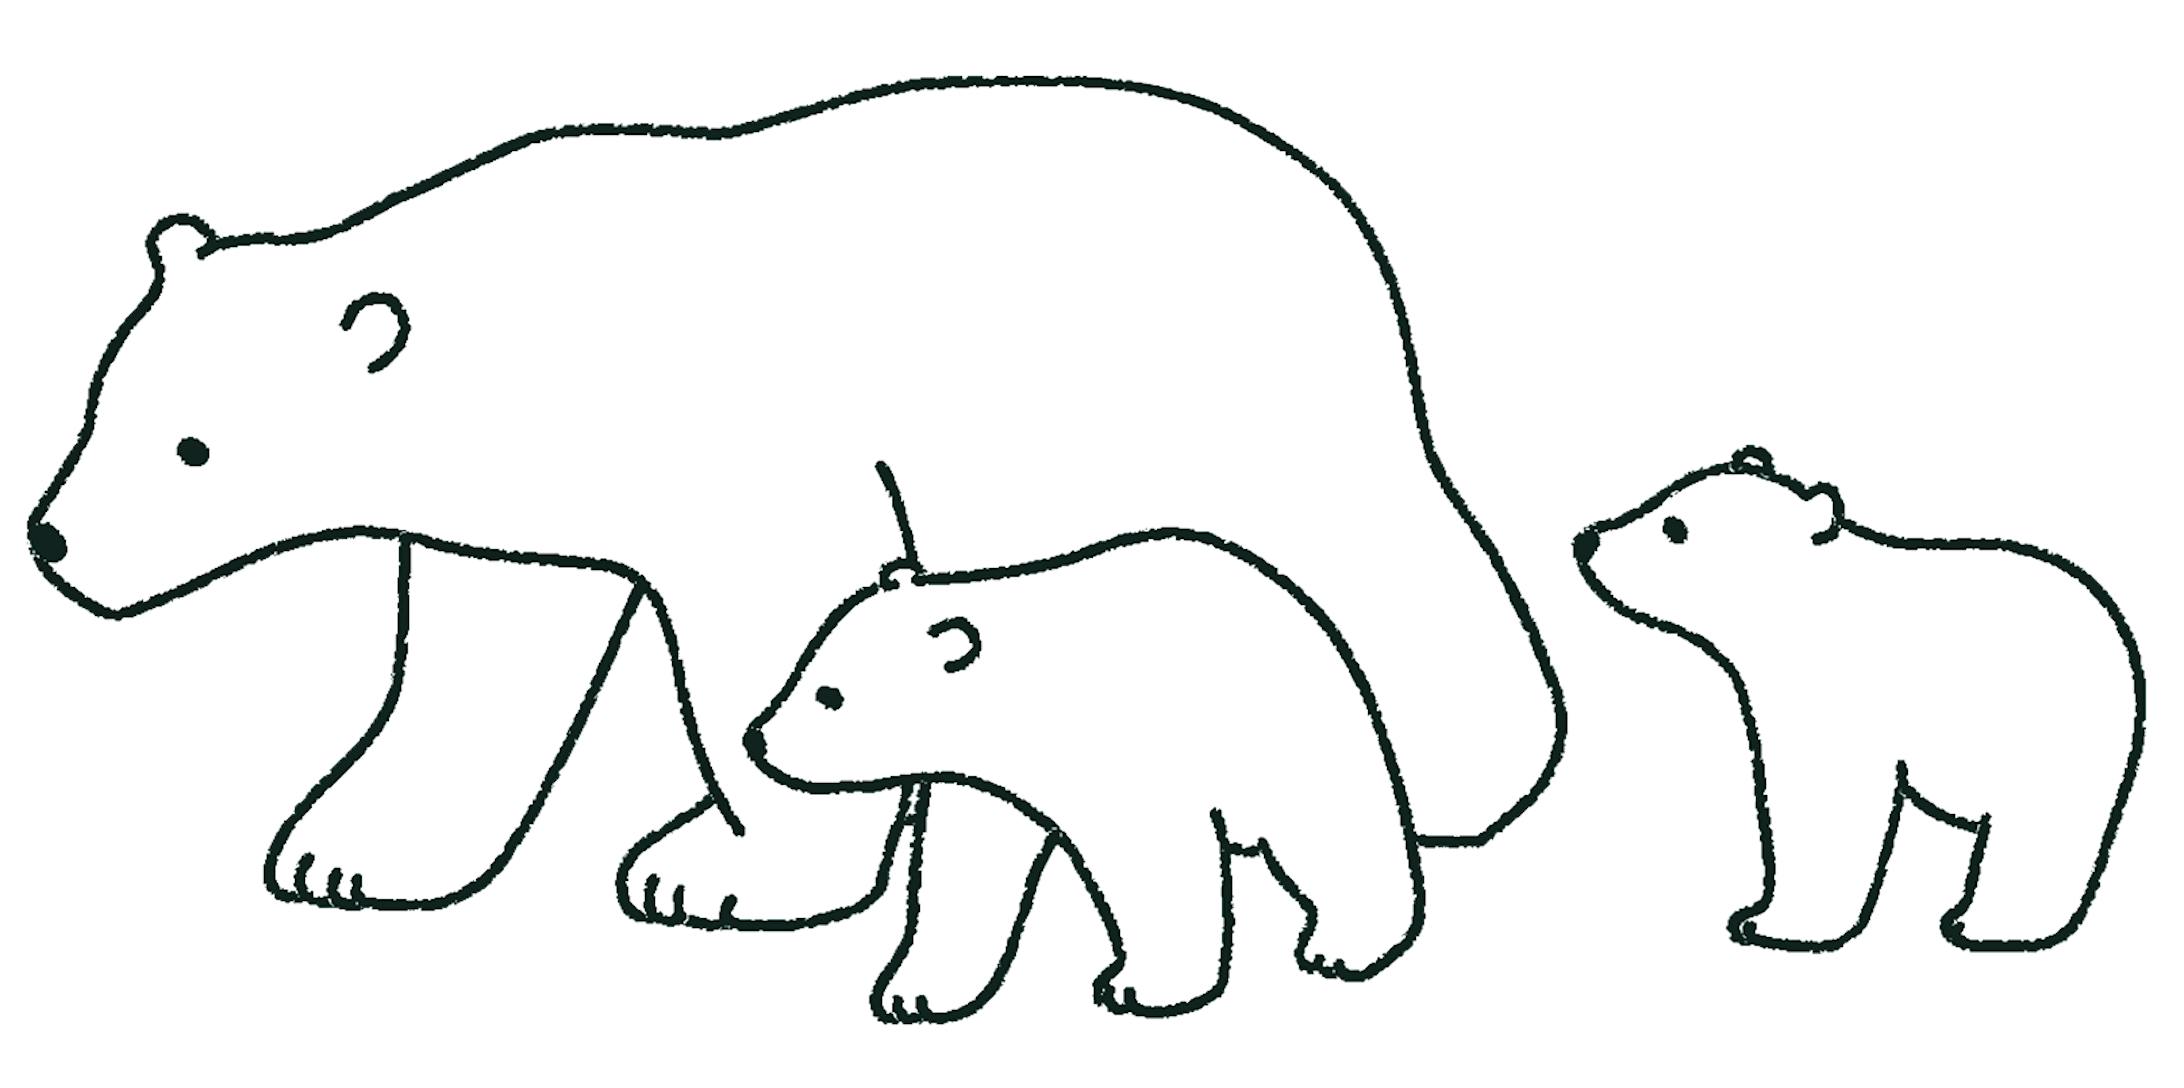 L Ours Polaireロゴイラスト